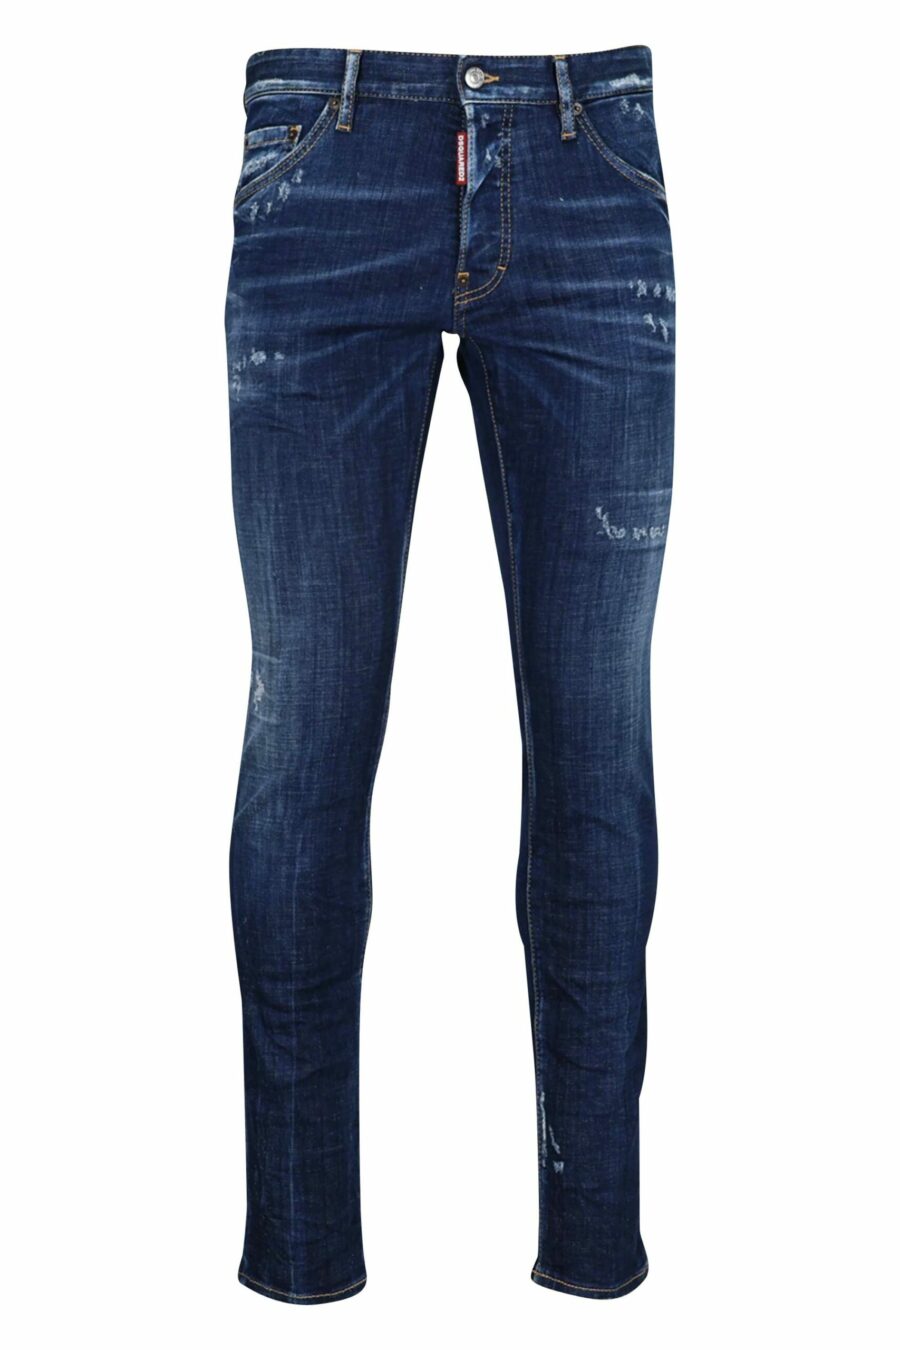 Blue "cool guy" jeans with wear and tear - 8054148102005 scaled